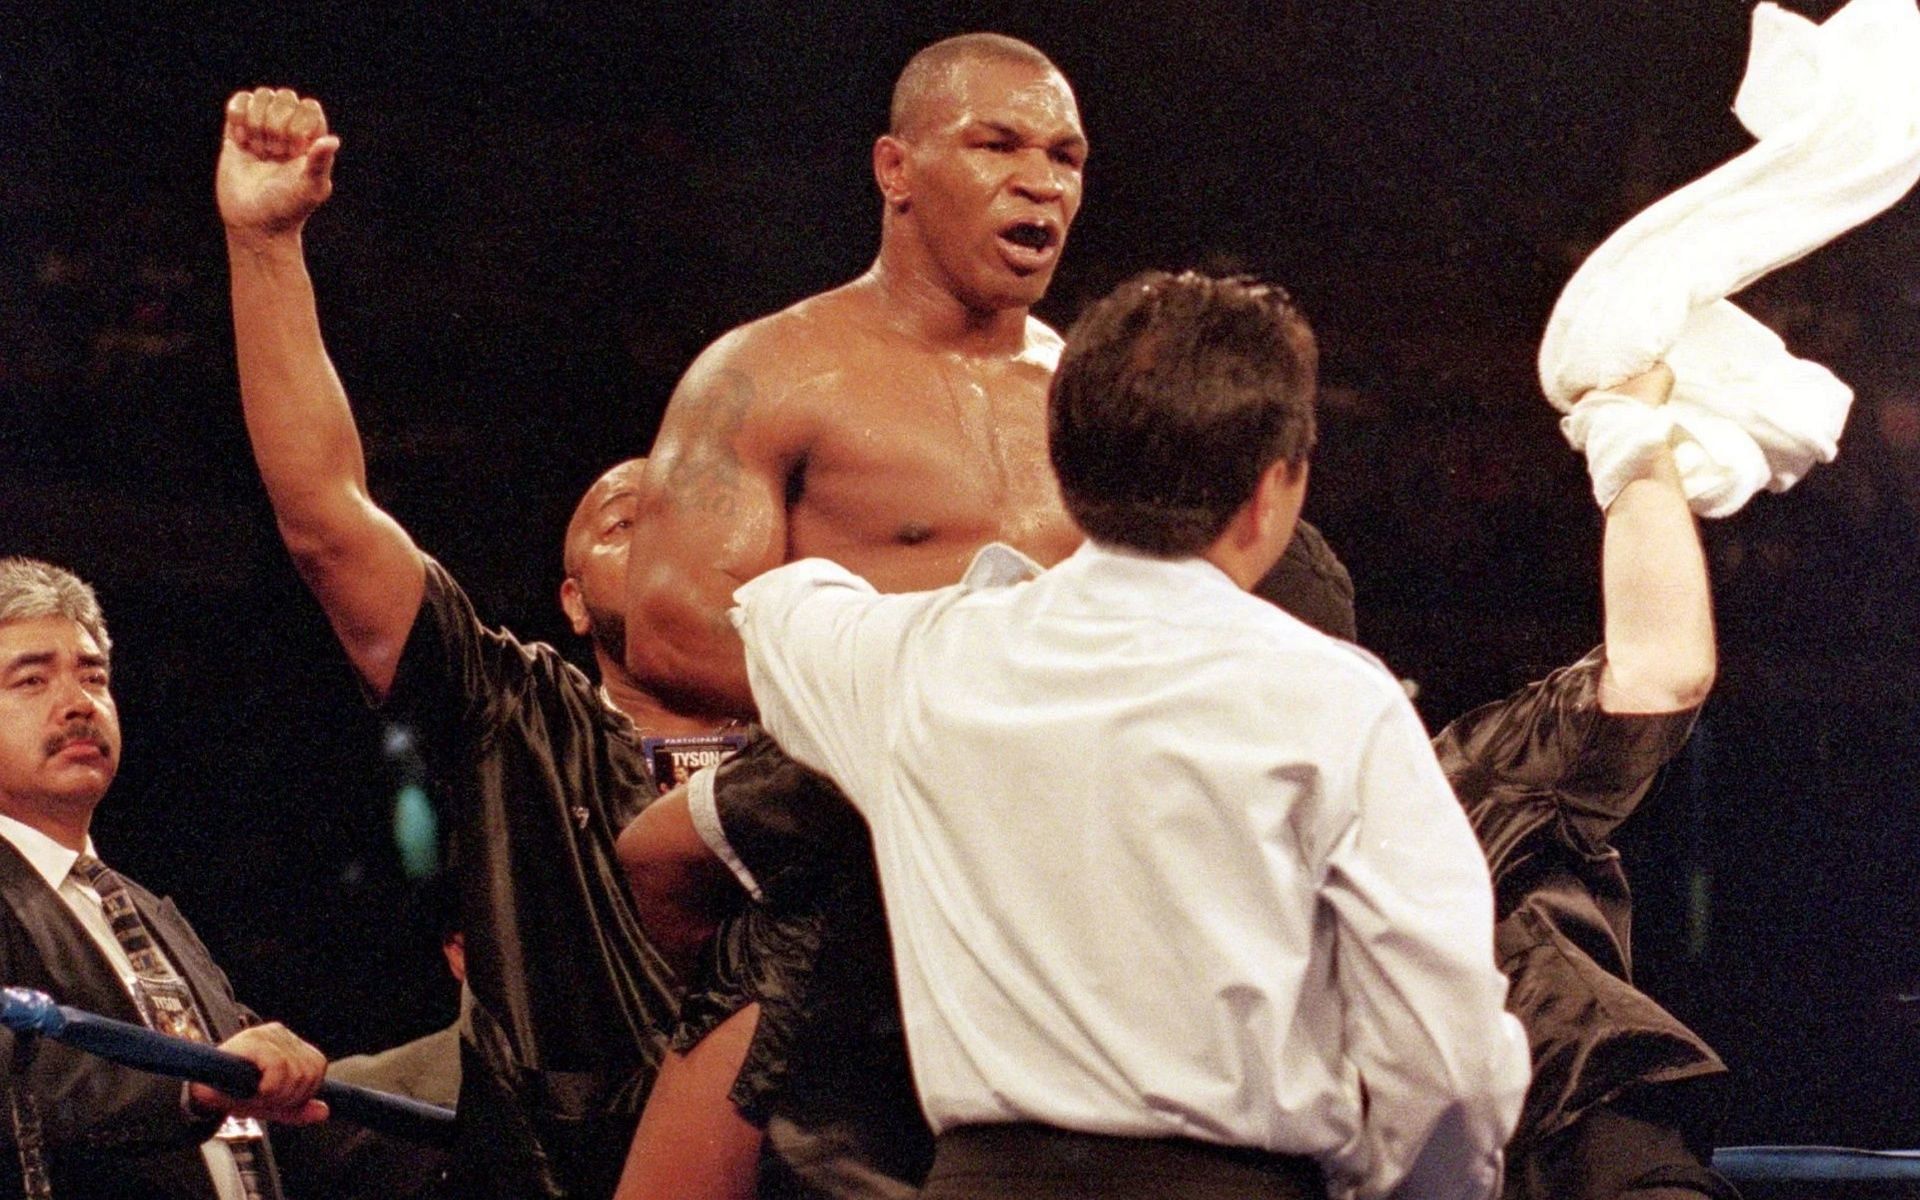 Mike Tyson has received some criticism from his former trainer Teddy Atlas. [Getty Images]